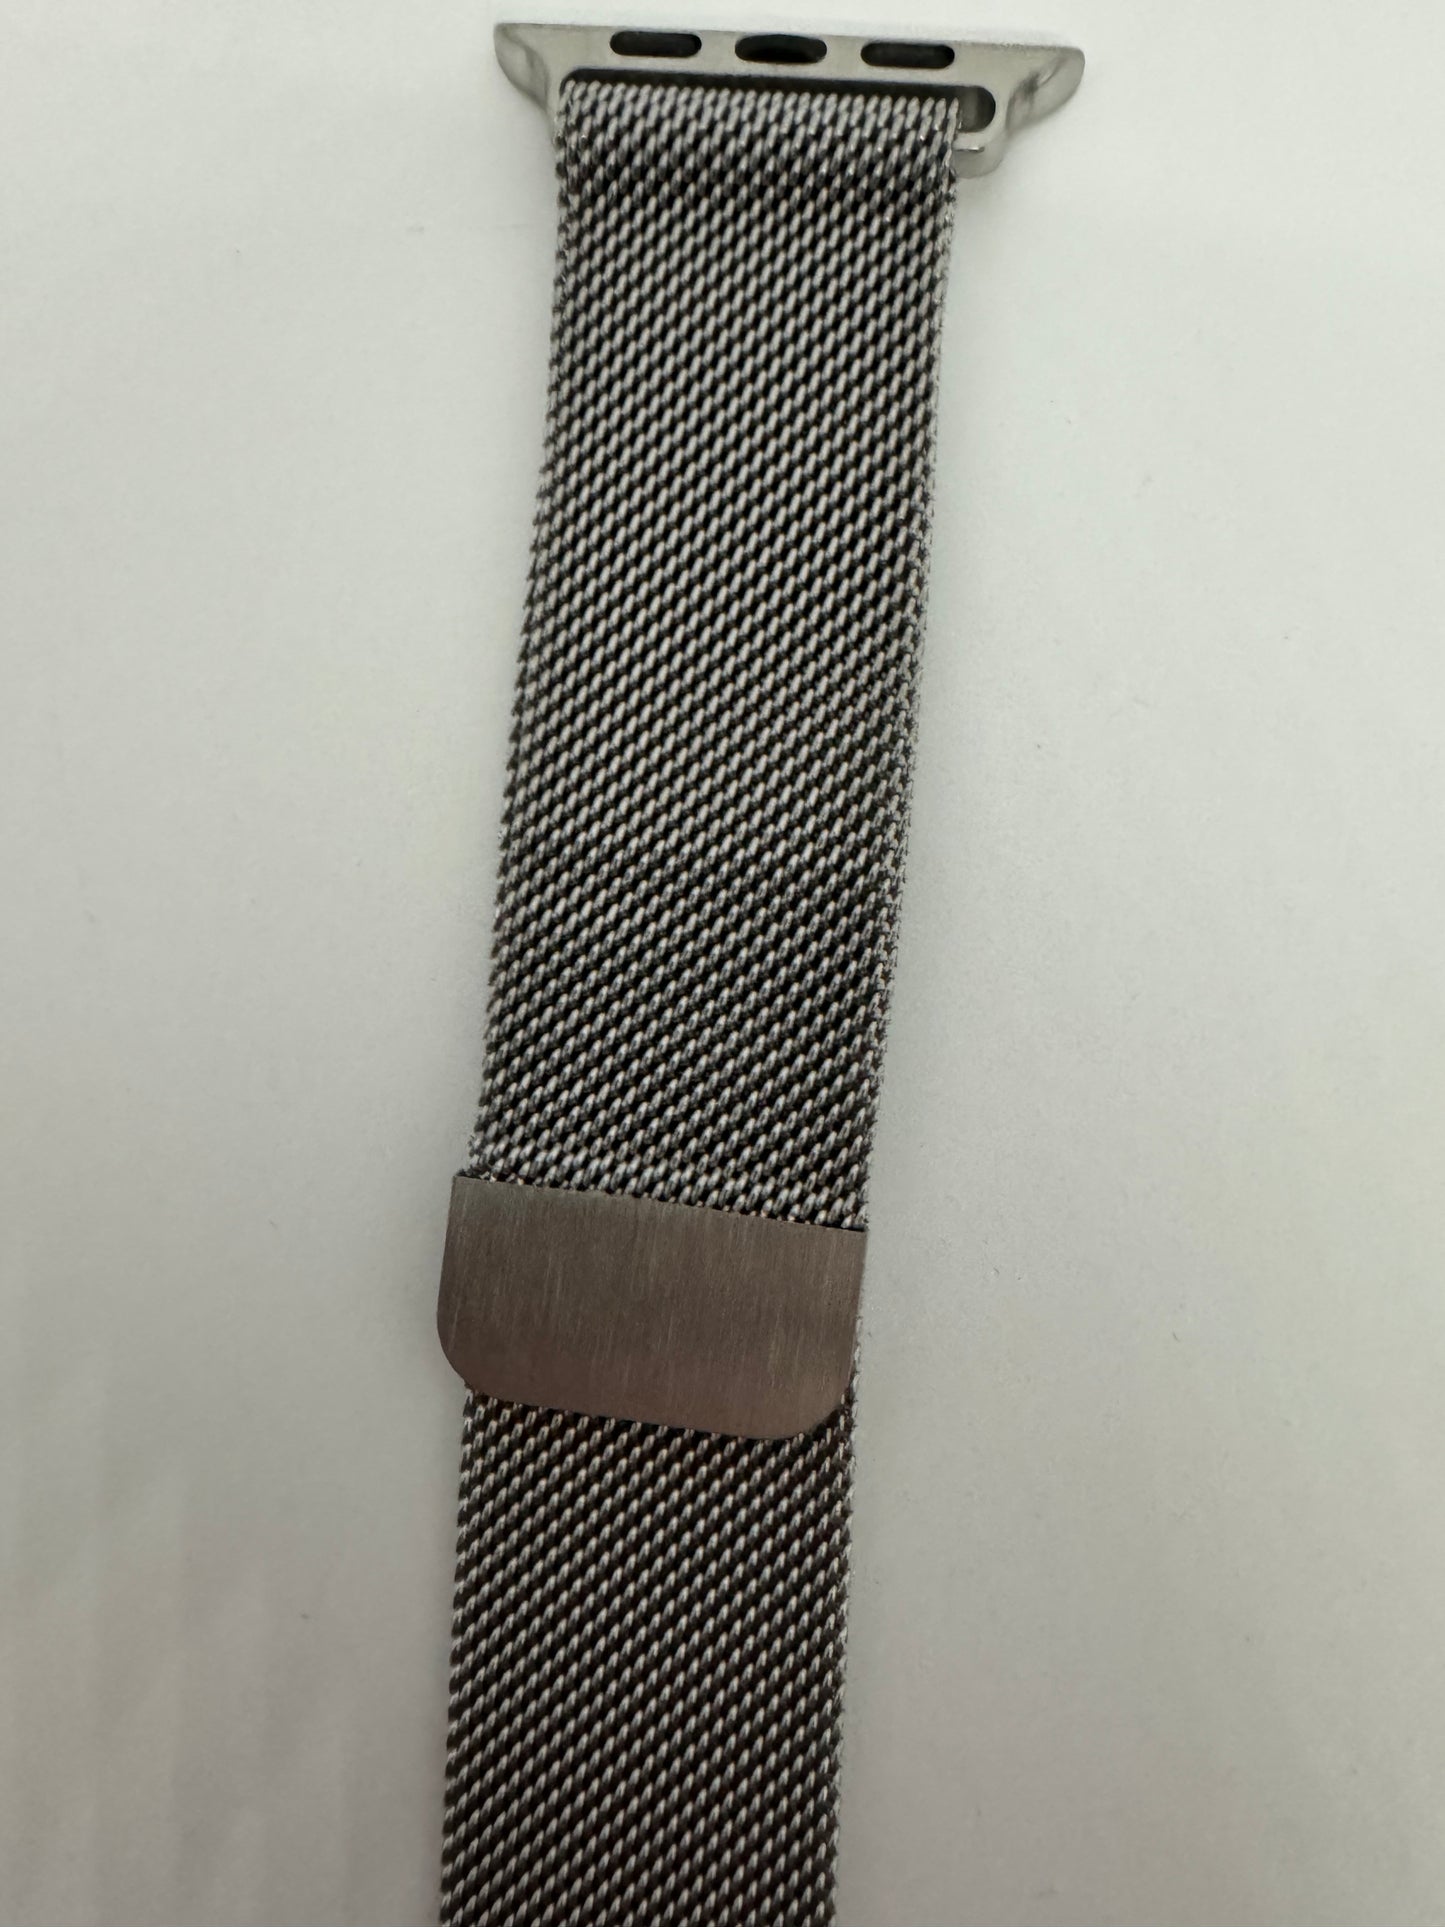 The picture shows a watch band. It is made of a tightly woven metal mesh, giving it a flexible and smooth texture. The color of the band is silver. At the top of the band, there is a silver attachment with three small holes on each side, which is used to connect the band to a watch. About halfway down the band, there is a rectangular metal clasp that is used to adjust the size and secure the band around the wrist. The background of the picture is white.